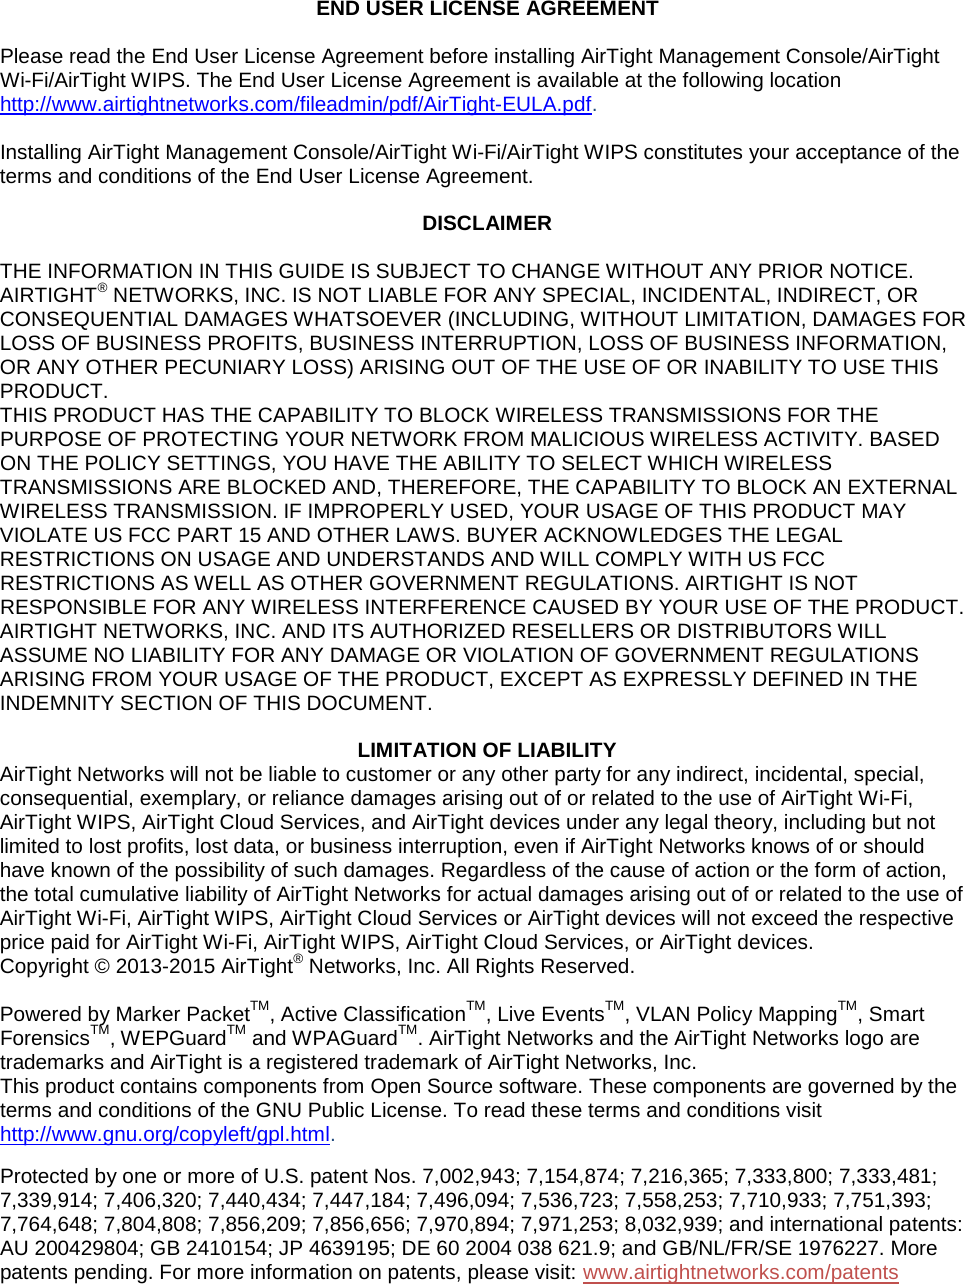      END USER LICENSE AGREEMENT   Please read the End User License Agreement before installing AirTight Management Console/AirTight Wi-Fi/AirTight WIPS. The End User License Agreement is available at the following location http://www.airtightnetworks.com/fileadmin/pdf/AirTight-EULA.pdf.  Installing AirTight Management Console/AirTight Wi-Fi/AirTight WIPS constitutes your acceptance of the terms and conditions of the End User License Agreement.    DISCLAIMER   THE INFORMATION IN THIS GUIDE IS SUBJECT TO CHANGE WITHOUT ANY PRIOR NOTICE. AIRTIGHT® NETWORKS, INC. IS NOT LIABLE FOR ANY SPECIAL, INCIDENTAL, INDIRECT, OR CONSEQUENTIAL DAMAGES WHATSOEVER (INCLUDING, WITHOUT LIMITATION, DAMAGES FOR LOSS OF BUSINESS PROFITS, BUSINESS INTERRUPTION, LOSS OF BUSINESS INFORMATION, OR ANY OTHER PECUNIARY LOSS) ARISING OUT OF THE USE OF OR INABILITY TO USE THIS PRODUCT. THIS PRODUCT HAS THE CAPABILITY TO BLOCK WIRELESS TRANSMISSIONS FOR THE PURPOSE OF PROTECTING YOUR NETWORK FROM MALICIOUS WIRELESS ACTIVITY. BASED ON THE POLICY SETTINGS, YOU HAVE THE ABILITY TO SELECT WHICH WIRELESS TRANSMISSIONS ARE BLOCKED AND, THEREFORE, THE CAPABILITY TO BLOCK AN EXTERNAL WIRELESS TRANSMISSION. IF IMPROPERLY USED, YOUR USAGE OF THIS PRODUCT MAY VIOLATE US FCC PART 15 AND OTHER LAWS. BUYER ACKNOWLEDGES THE LEGAL RESTRICTIONS ON USAGE AND UNDERSTANDS AND WILL COMPLY WITH US FCC RESTRICTIONS AS WELL AS OTHER GOVERNMENT REGULATIONS. AIRTIGHT IS NOT RESPONSIBLE FOR ANY WIRELESS INTERFERENCE CAUSED BY YOUR USE OF THE PRODUCT. AIRTIGHT NETWORKS, INC. AND ITS AUTHORIZED RESELLERS OR DISTRIBUTORS WILL ASSUME NO LIABILITY FOR ANY DAMAGE OR VIOLATION OF GOVERNMENT REGULATIONS ARISING FROM YOUR USAGE OF THE PRODUCT, EXCEPT AS EXPRESSLY DEFINED IN THE INDEMNITY SECTION OF THIS DOCUMENT.    LIMITATION OF LIABILITY AirTight Networks will not be liable to customer or any other party for any indirect, incidental, special, consequential, exemplary, or reliance damages arising out of or related to the use of AirTight Wi-Fi, AirTight WIPS, AirTight Cloud Services, and AirTight devices under any legal theory, including but not limited to lost profits, lost data, or business interruption, even if AirTight Networks knows of or should have known of the possibility of such damages. Regardless of the cause of action or the form of action, the total cumulative liability of AirTight Networks for actual damages arising out of or related to the use of AirTight Wi-Fi, AirTight WIPS, AirTight Cloud Services or AirTight devices will not exceed the respective price paid for AirTight Wi-Fi, AirTight WIPS, AirTight Cloud Services, or AirTight devices. Copyright © 2013-2015 AirTight® Networks, Inc. All Rights Reserved.   Powered by Marker PacketTM, Active ClassificationTM, Live EventsTM, VLAN Policy MappingTM, Smart ForensicsTM, WEPGuardTM and WPAGuardTM. AirTight Networks and the AirTight Networks logo are trademarks and AirTight is a registered trademark of AirTight Networks, Inc. This product contains components from Open Source software. These components are governed by the terms and conditions of the GNU Public License. To read these terms and conditions visit http://www.gnu.org/copyleft/gpl.html. Protected by one or more of U.S. patent Nos. 7,002,943; 7,154,874; 7,216,365; 7,333,800; 7,333,481; 7,339,914; 7,406,320; 7,440,434; 7,447,184; 7,496,094; 7,536,723; 7,558,253; 7,710,933; 7,751,393; 7,764,648; 7,804,808; 7,856,209; 7,856,656; 7,970,894; 7,971,253; 8,032,939; and international patents: AU 200429804; GB 2410154; JP 4639195; DE 60 2004 038 621.9; and GB/NL/FR/SE 1976227. More patents pending. For more information on patents, please visit: www.airtightnetworks.com/patents  